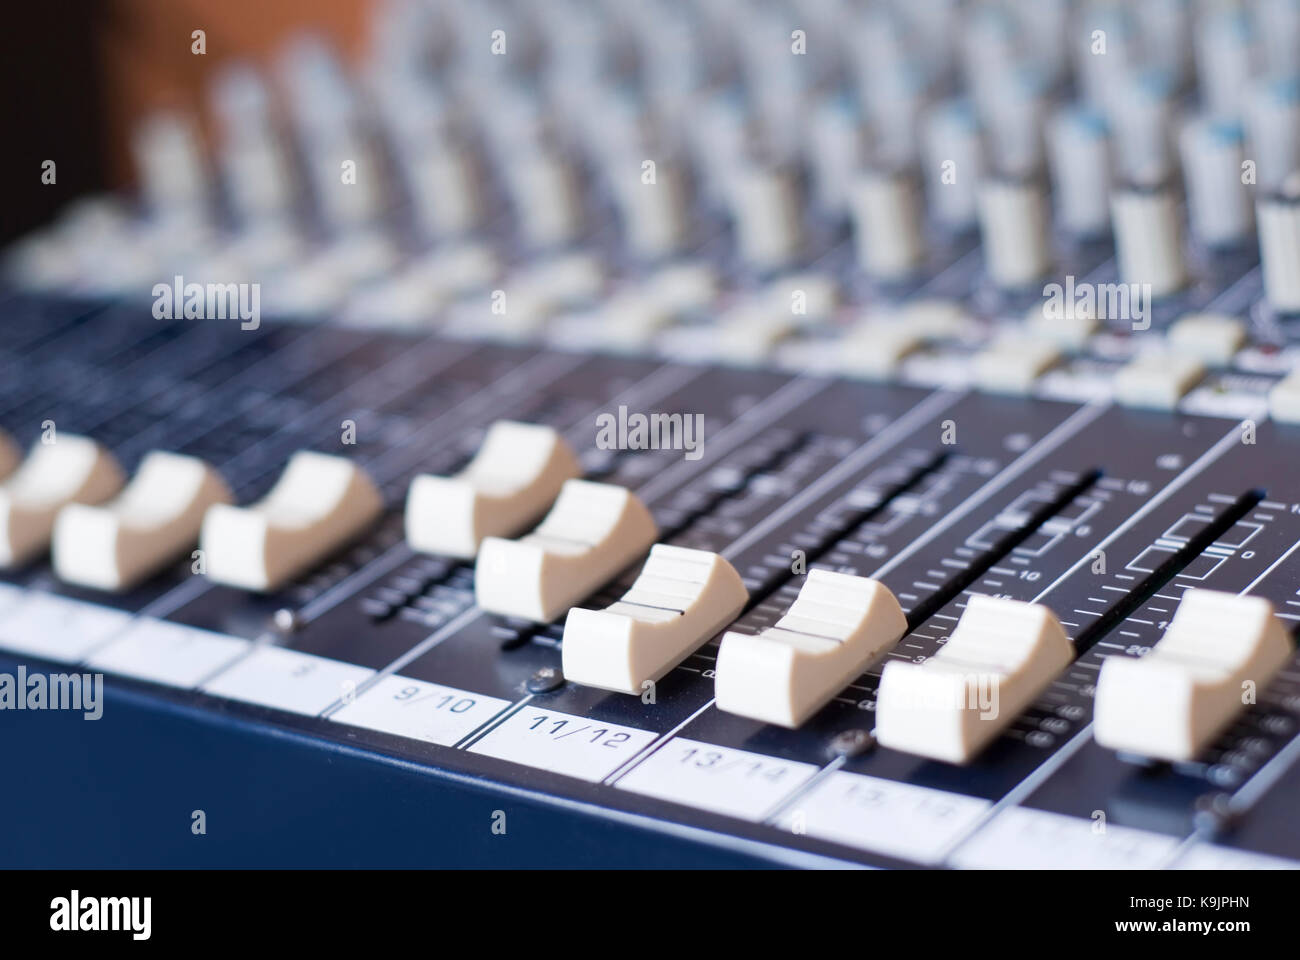 Many knobs controllers and switches on a audio mixer Stock Photo